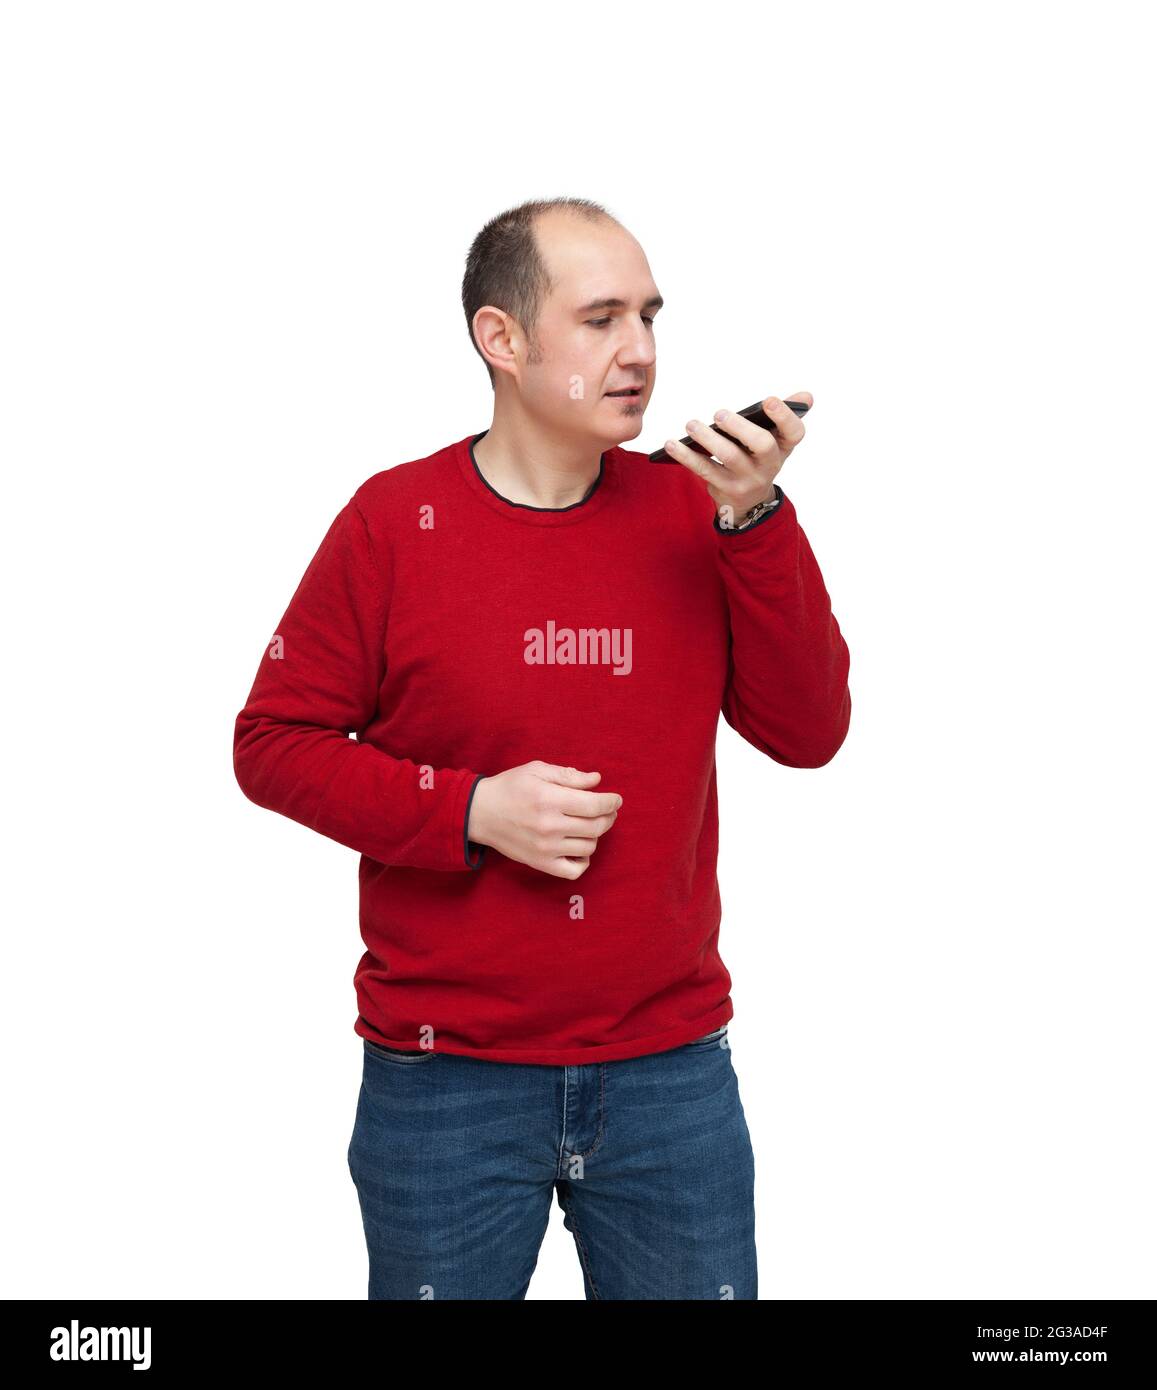 A bald young man is recording an audio note with his mobile phone. The  person is dressed in a red sweater, jeans and wears a watch. The background  is Stock Photo -